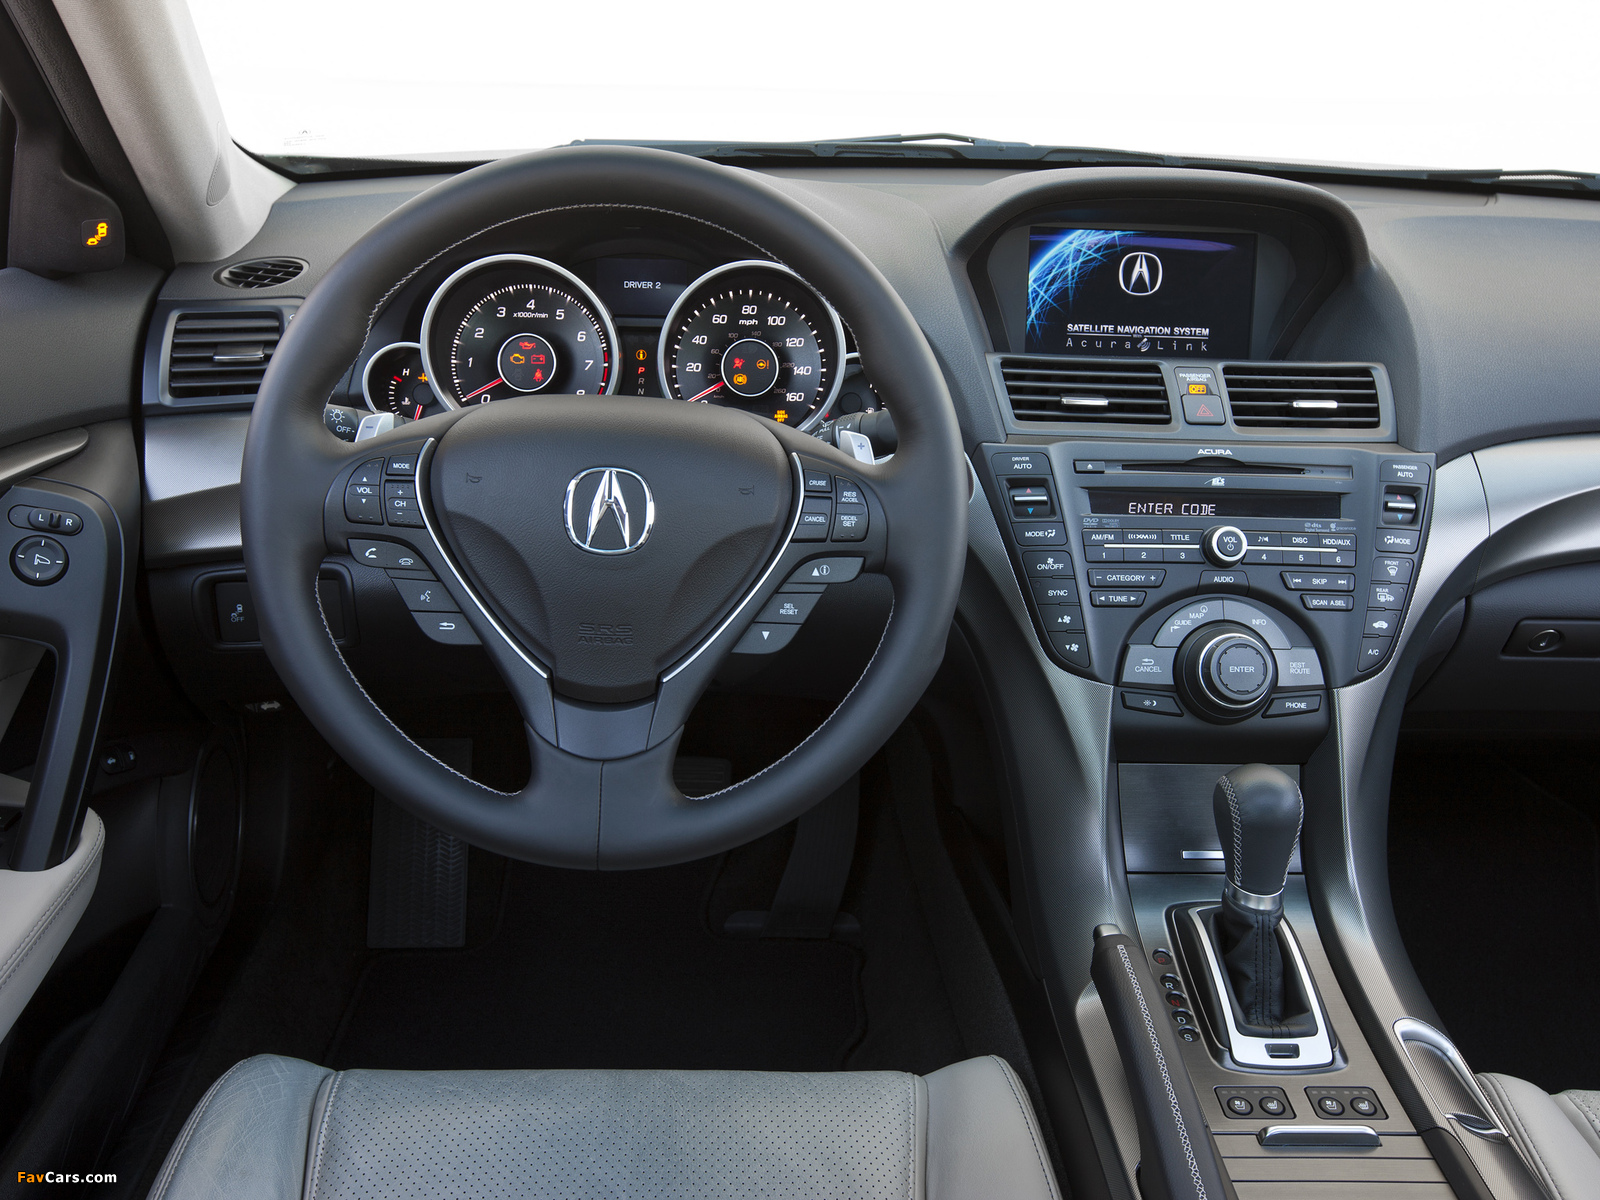 Acura TL SH-AWD (2011) images (1600 x 1200)